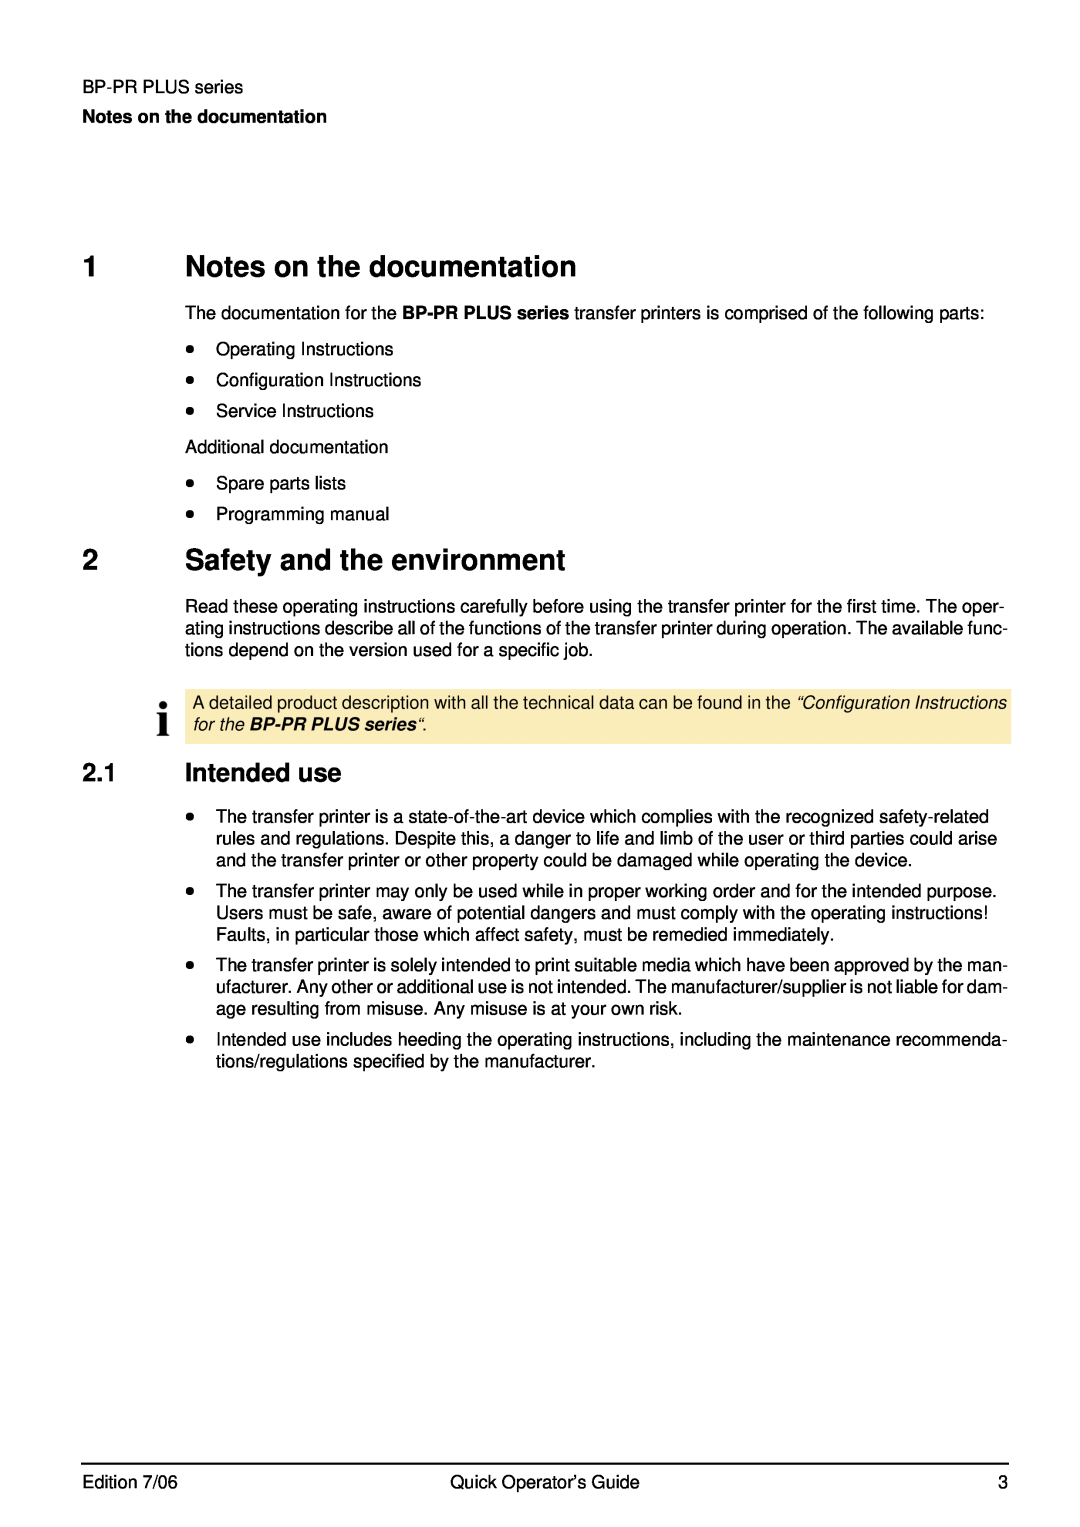 Brady BP-PR PLUS Series manual Notes on the documentation, Safety and the environment, Intended use 